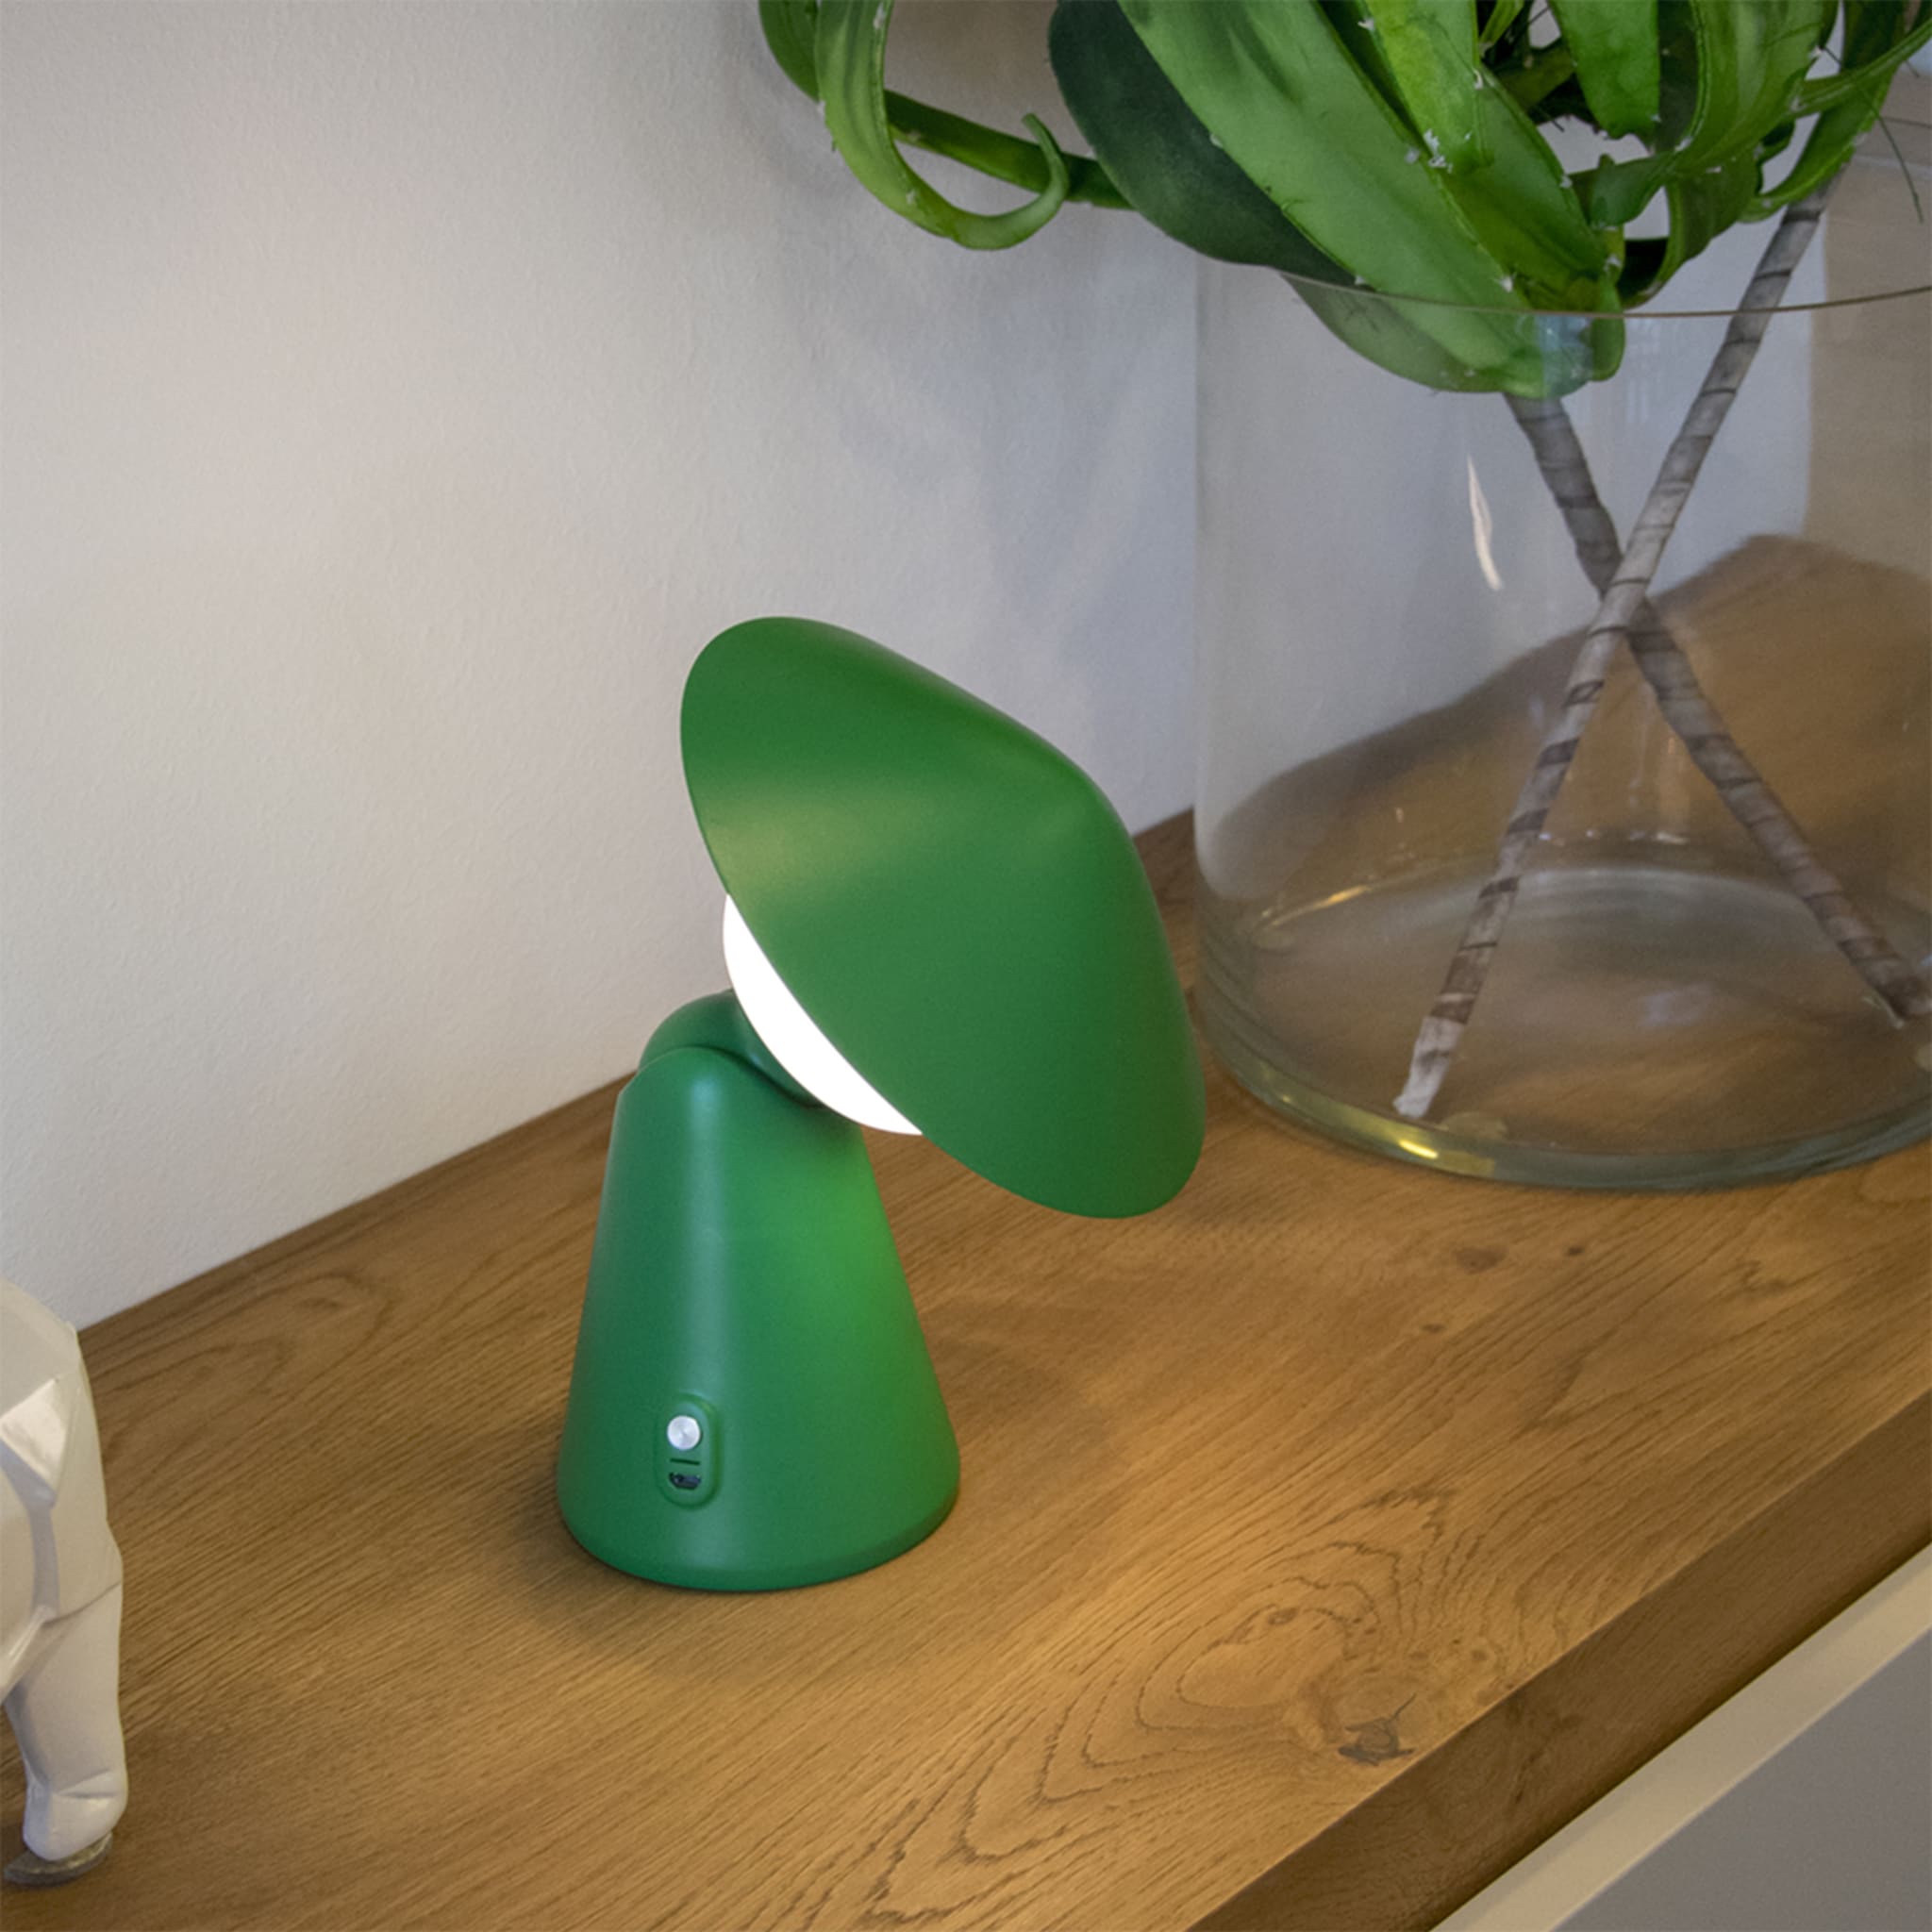 Puddy Green Rechargeable Table Lamp by Albore Design - Alternative view 3